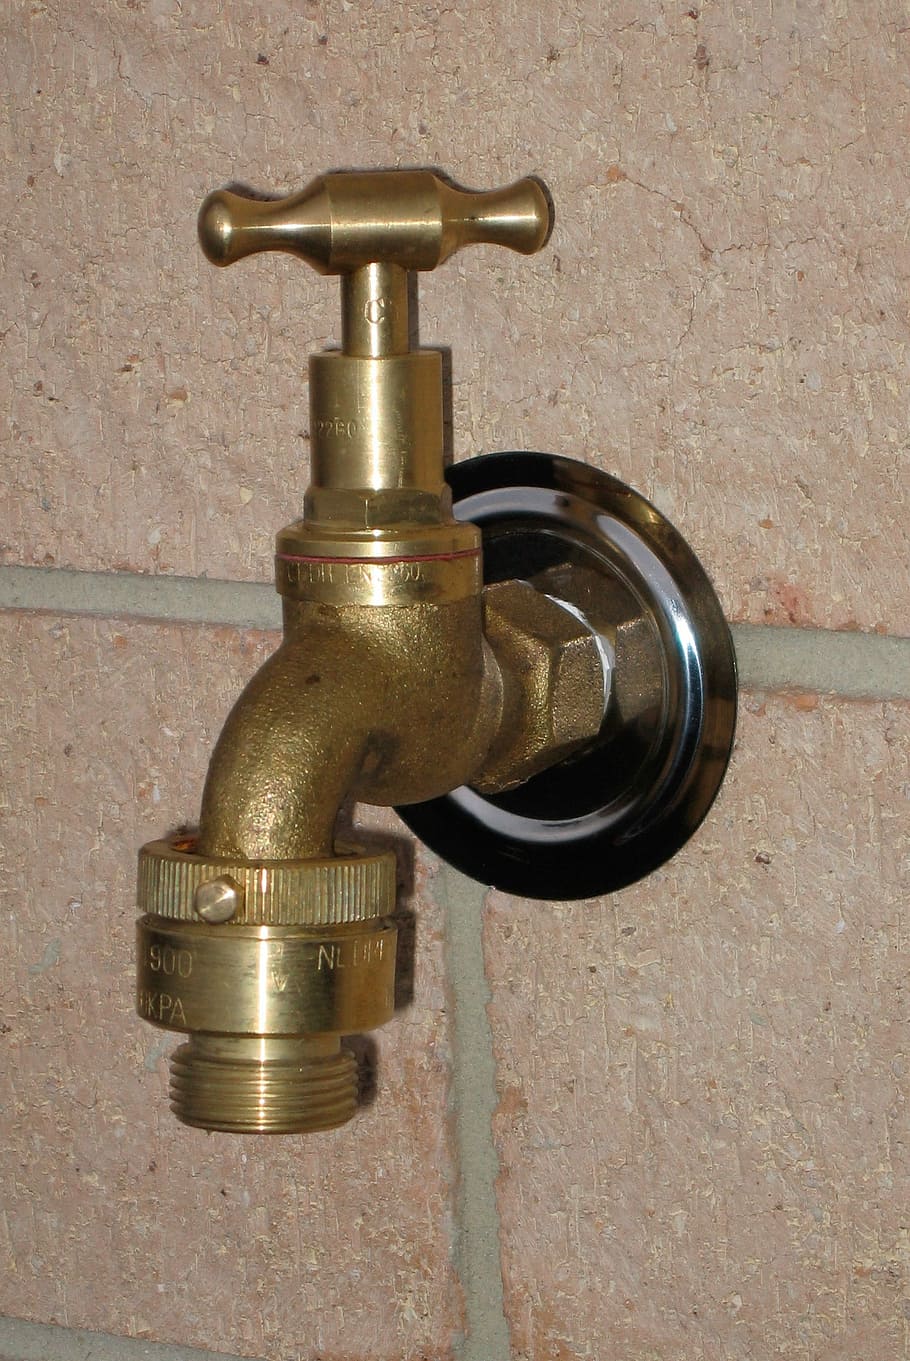 Tap, Brass, Faucet, Metal, brass tap, brick wall, new, close-up, bathroom, architecture